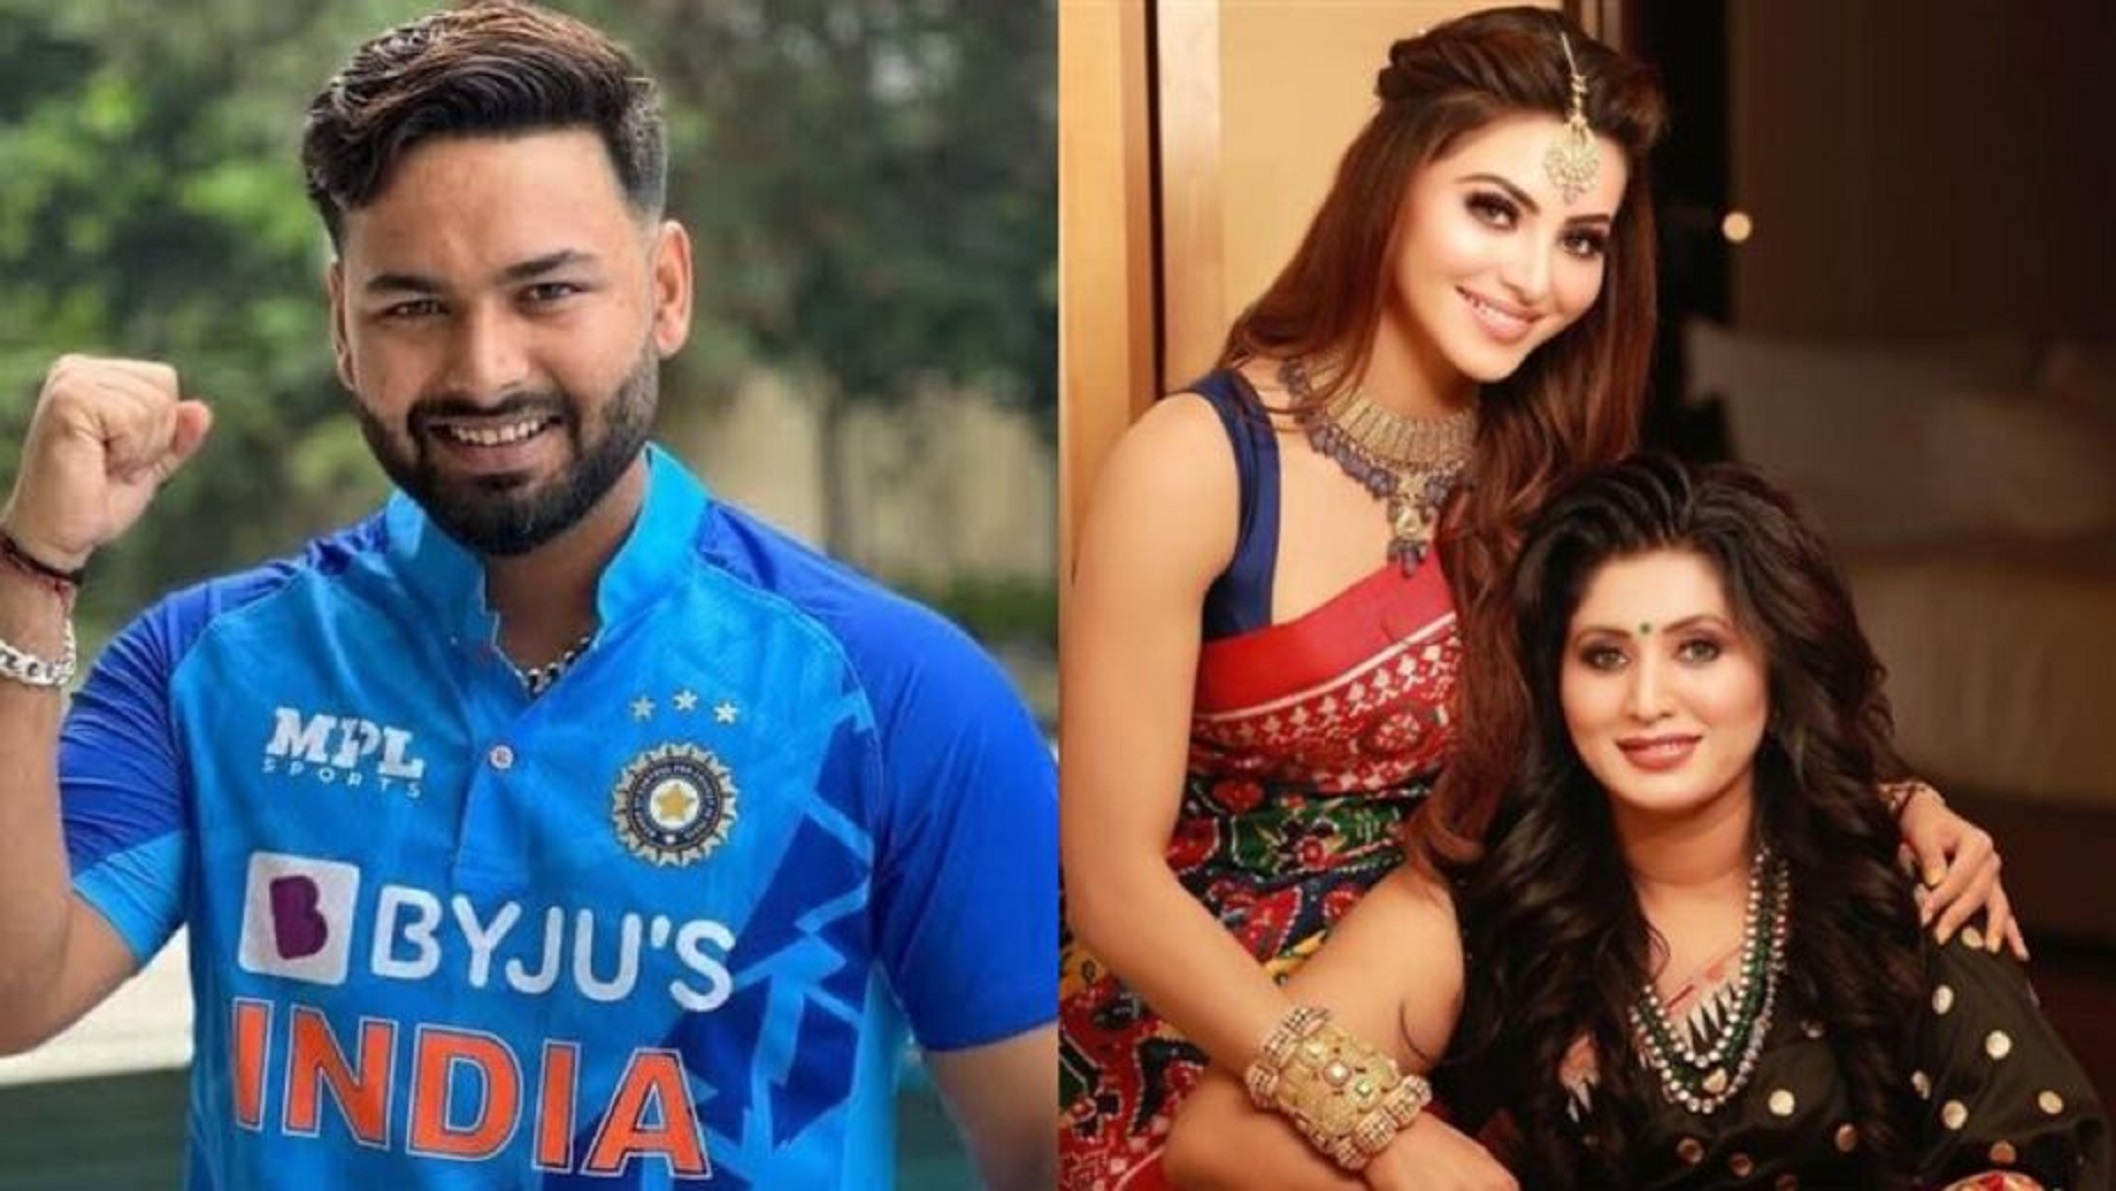 Urvashi Rautela’s mother writes a special message of Rishabh Pant, also says ‘The rumours on social media…’